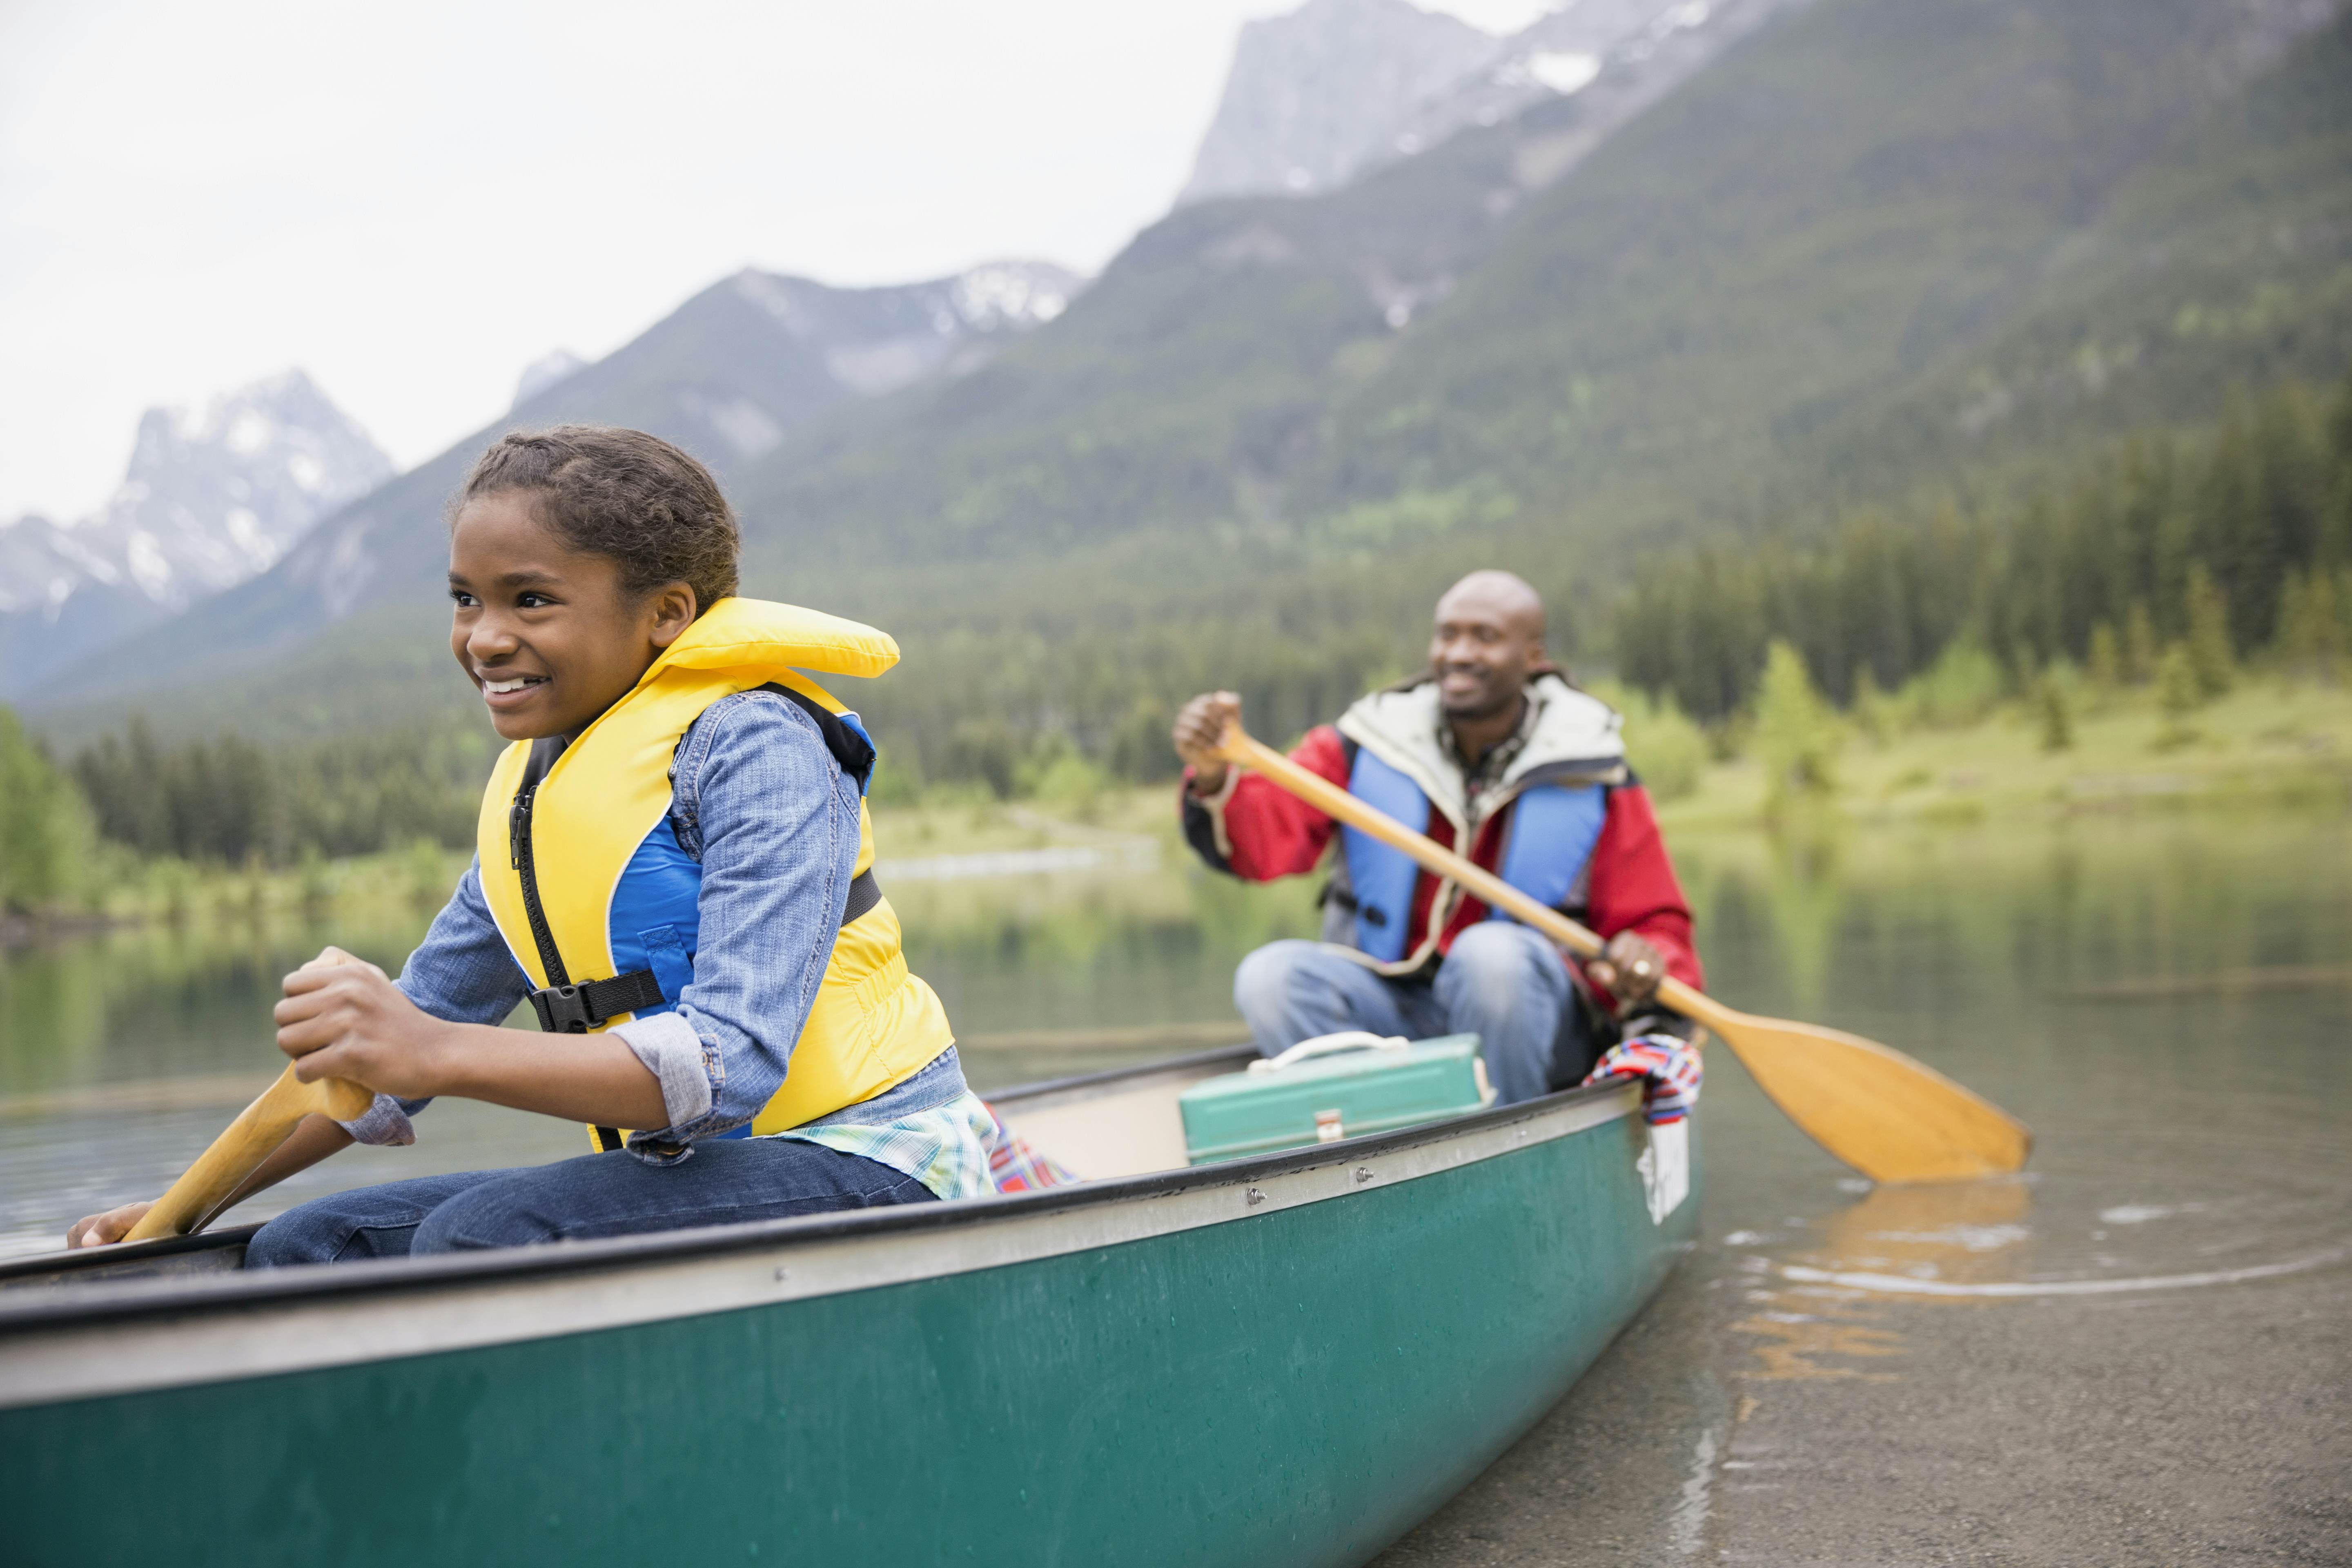 14 great things to do with kids in Canada